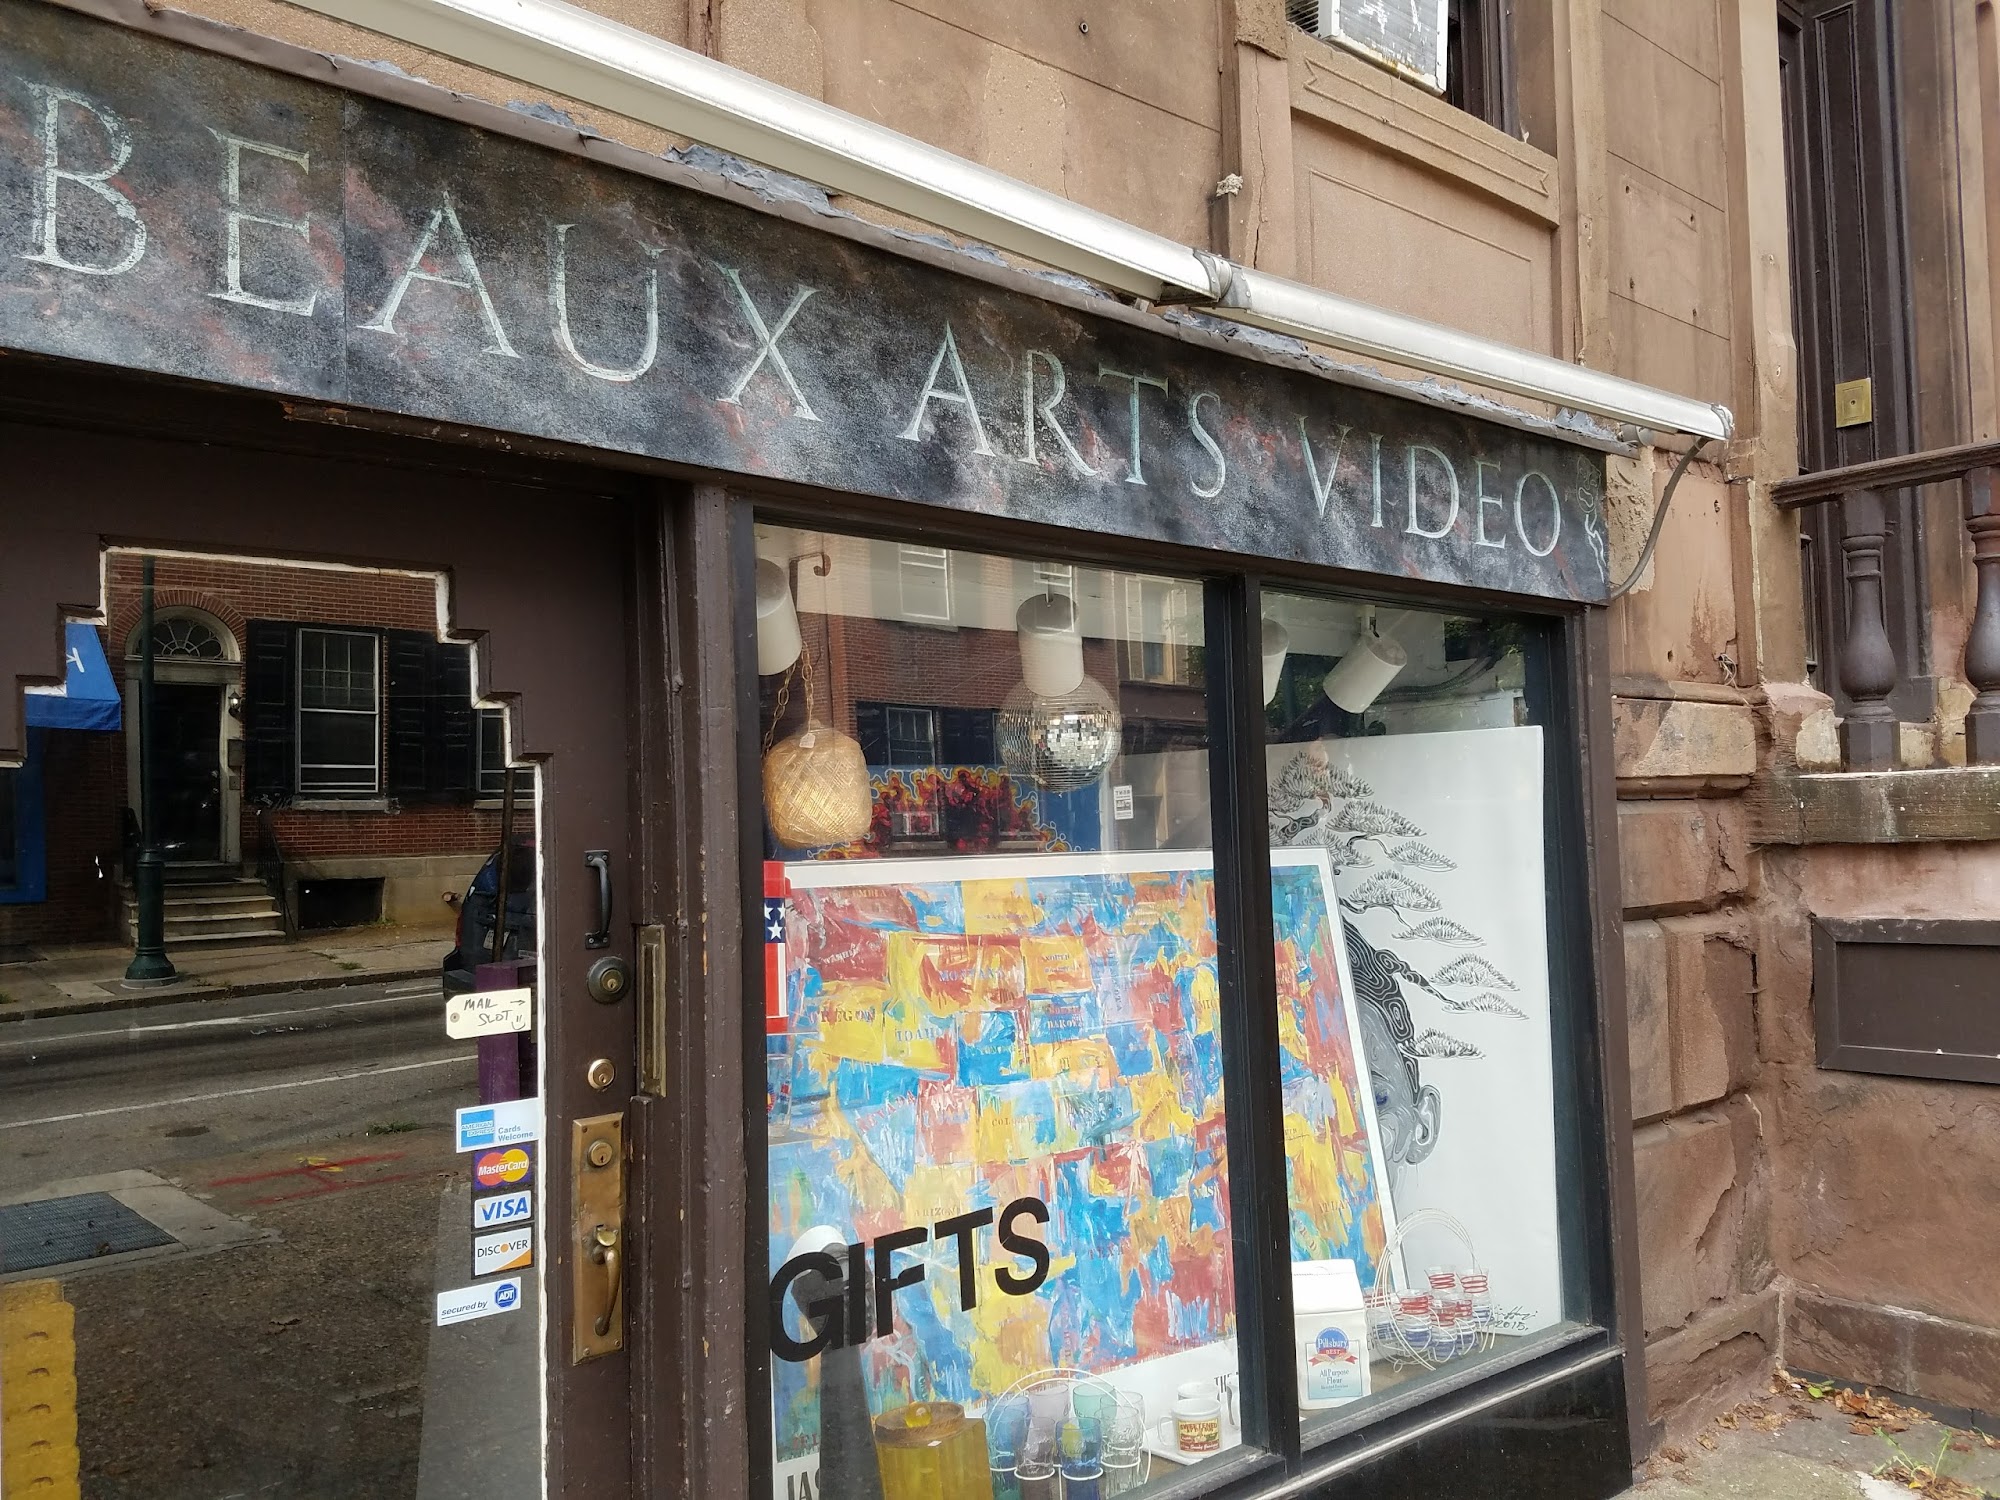 Beaux Arts Vintage (and Video)